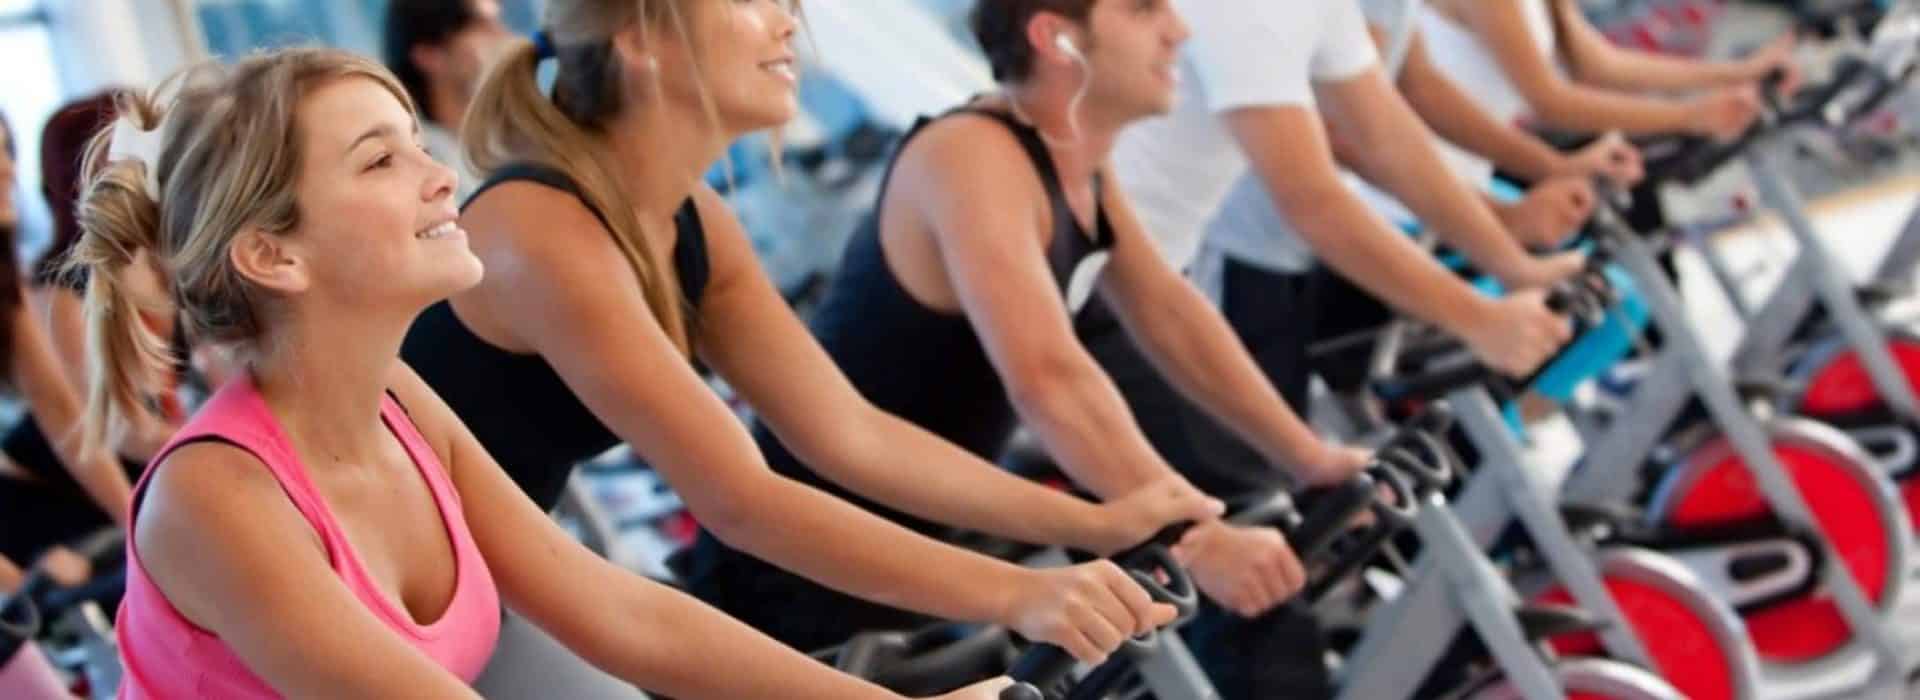 group of people riding indoor bikes in a spin class|five people on a row of treadmills at the gym